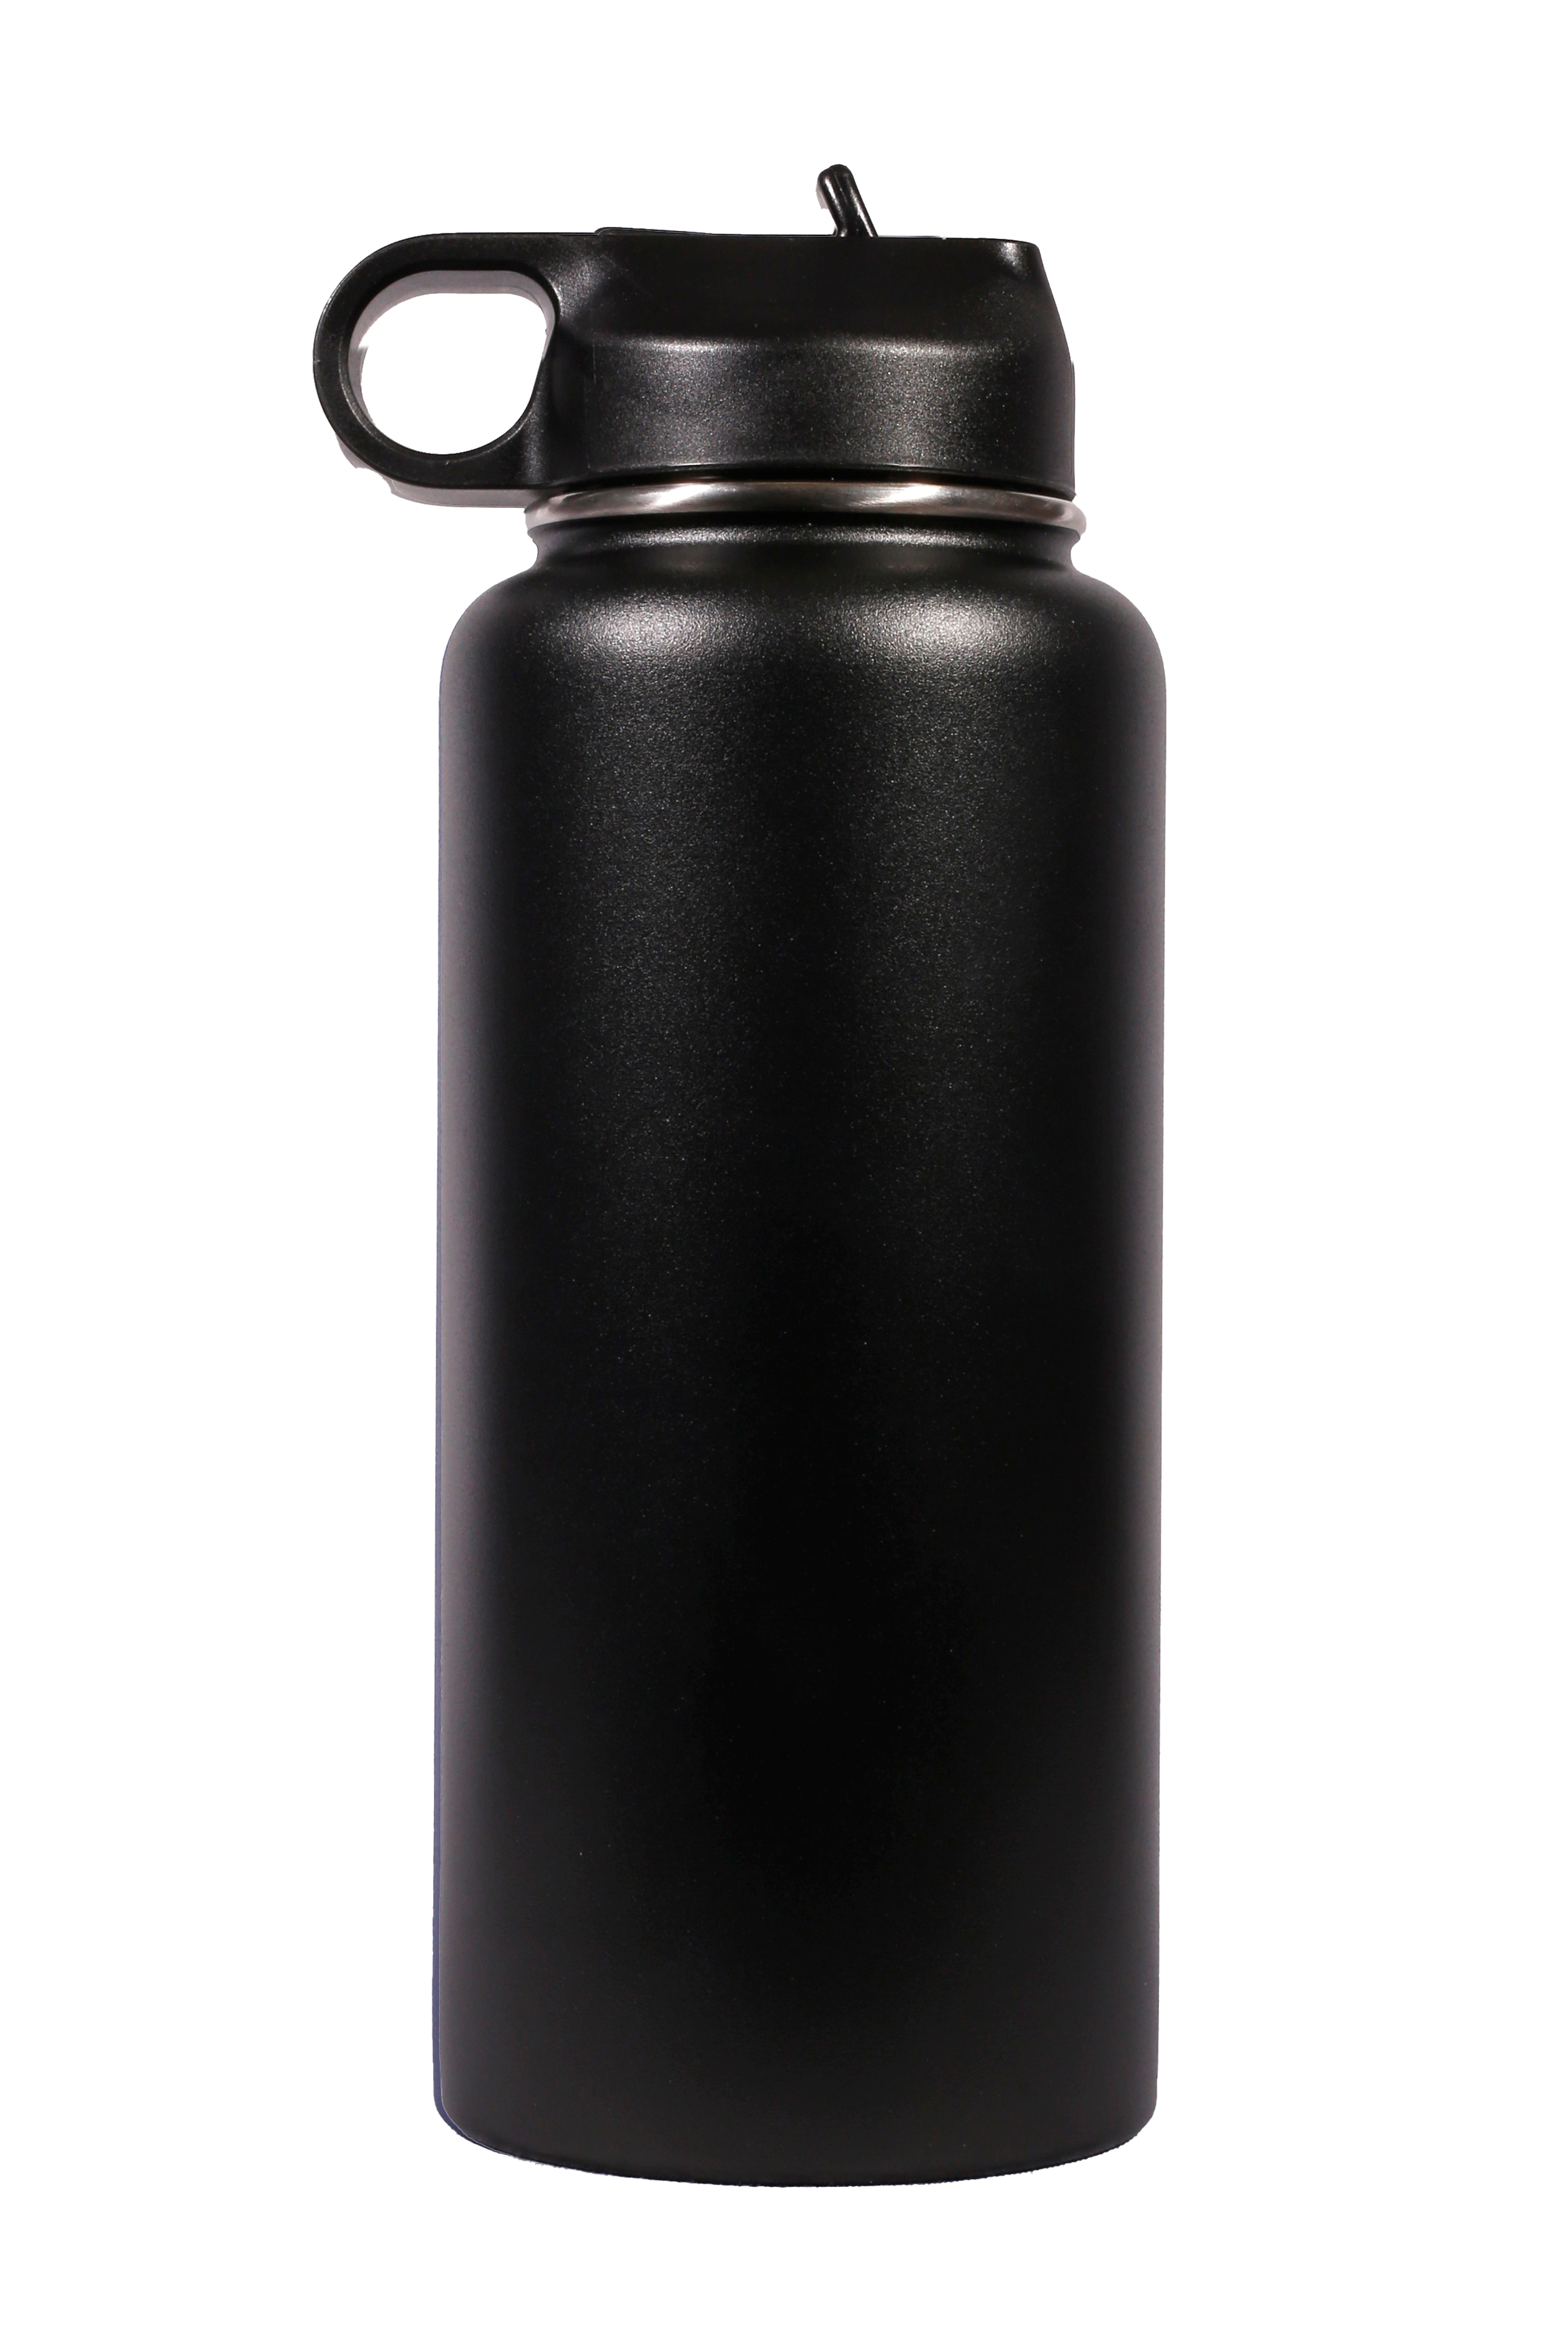 32 oz. Insulated Stainless Steel Water Bottle with Flip Top Lid & Straw